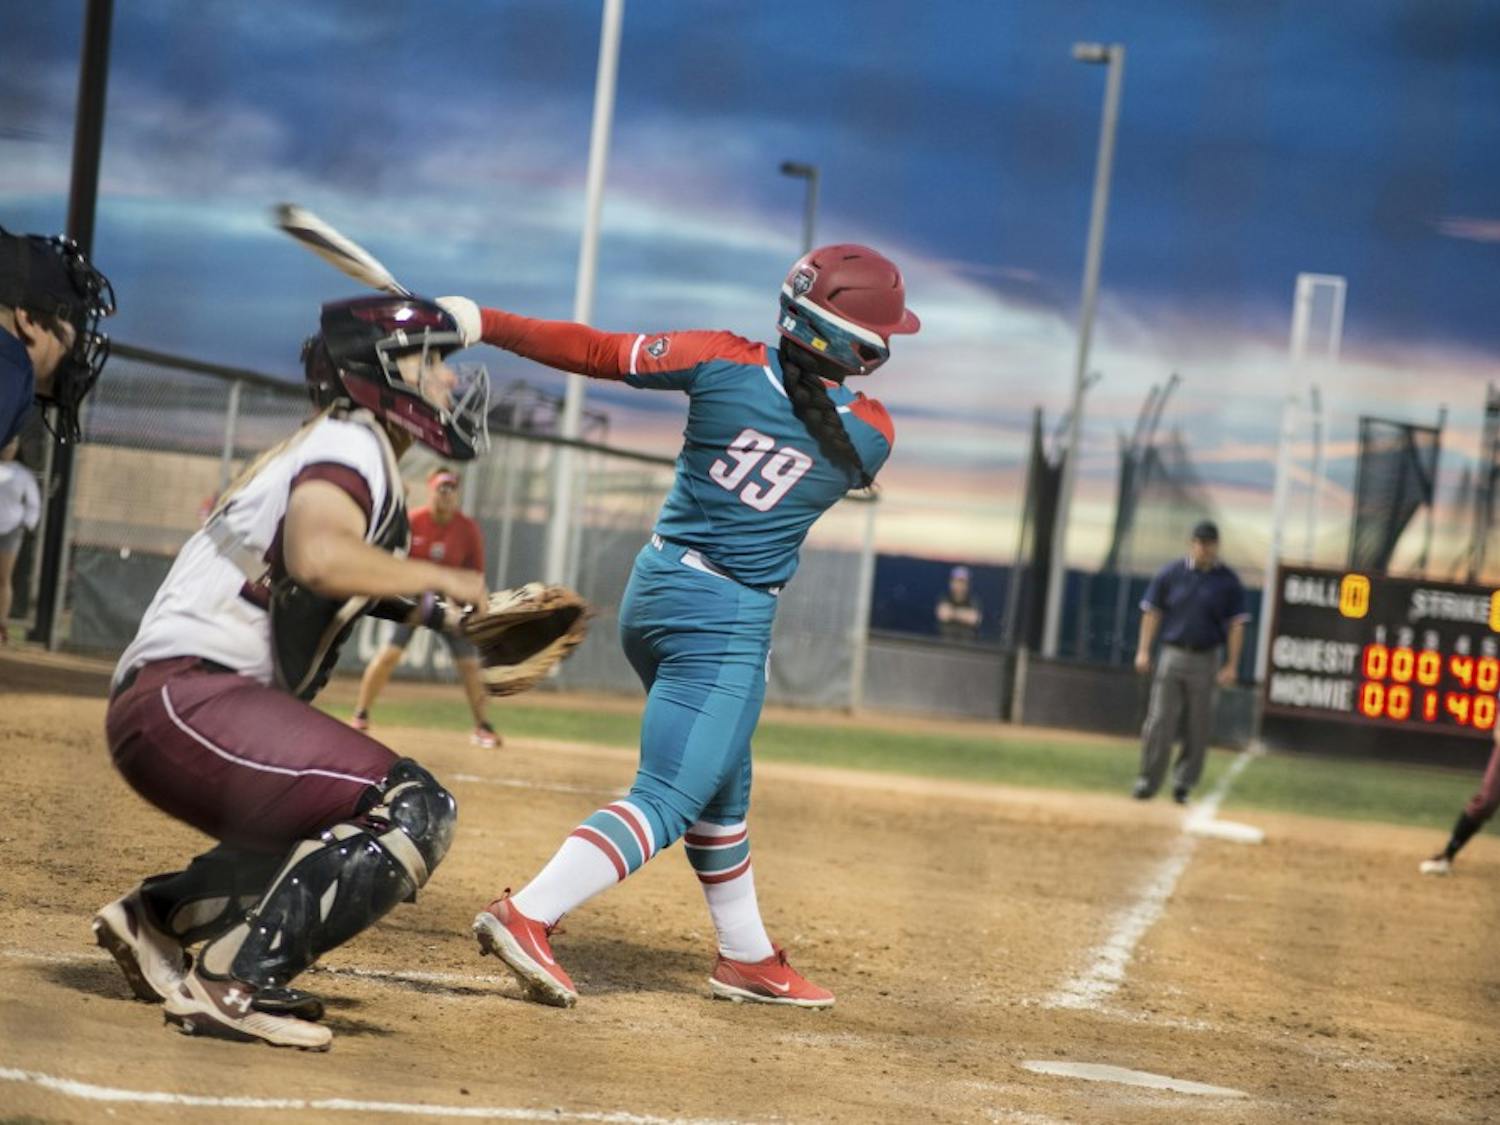 Day'Mian Johnson swings at a pitch during Wednesday night's rivalry matchup between the Lobos and the New Mexico State Aggies at Lobo Softball Field. Johnson, a freshman, recorded the first hit of her career. The Aggies won 12-7.